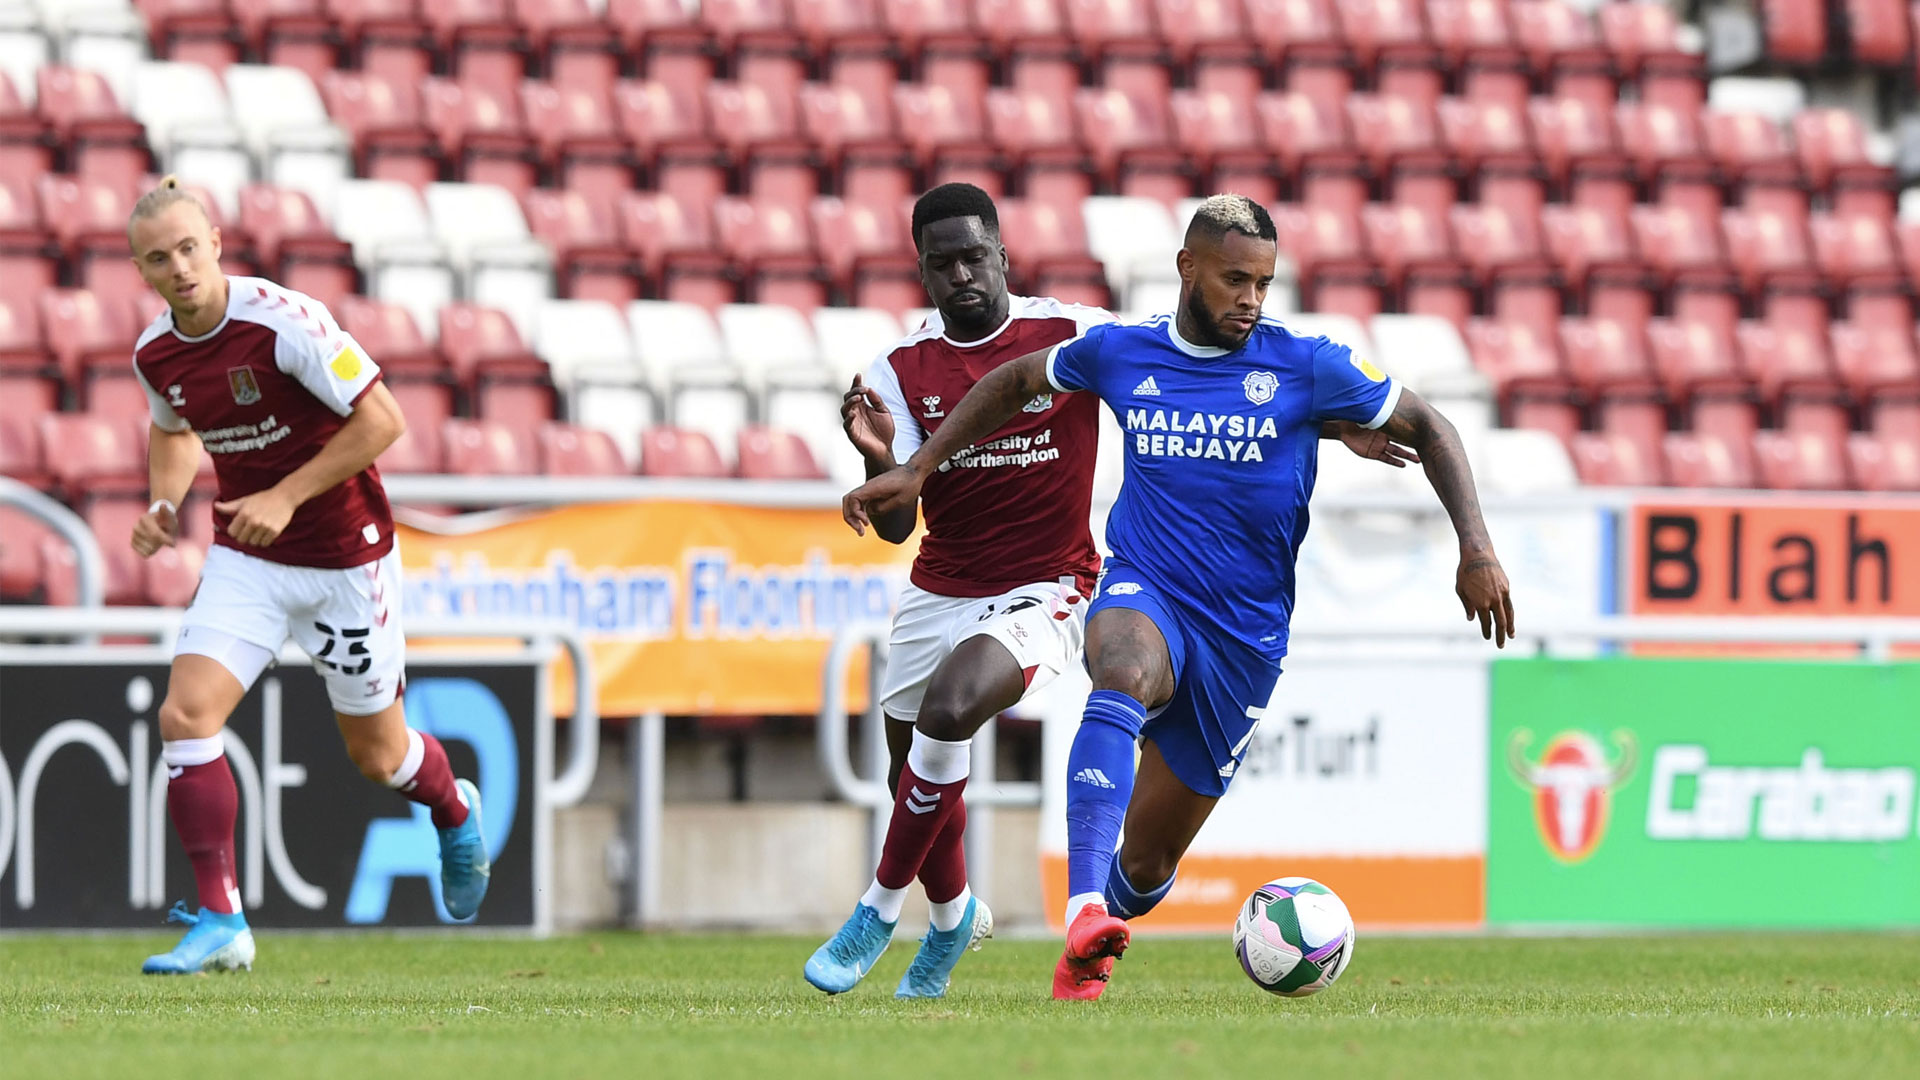 Leandro Bacuna in action against Northampton Town in the Carabao Cup.